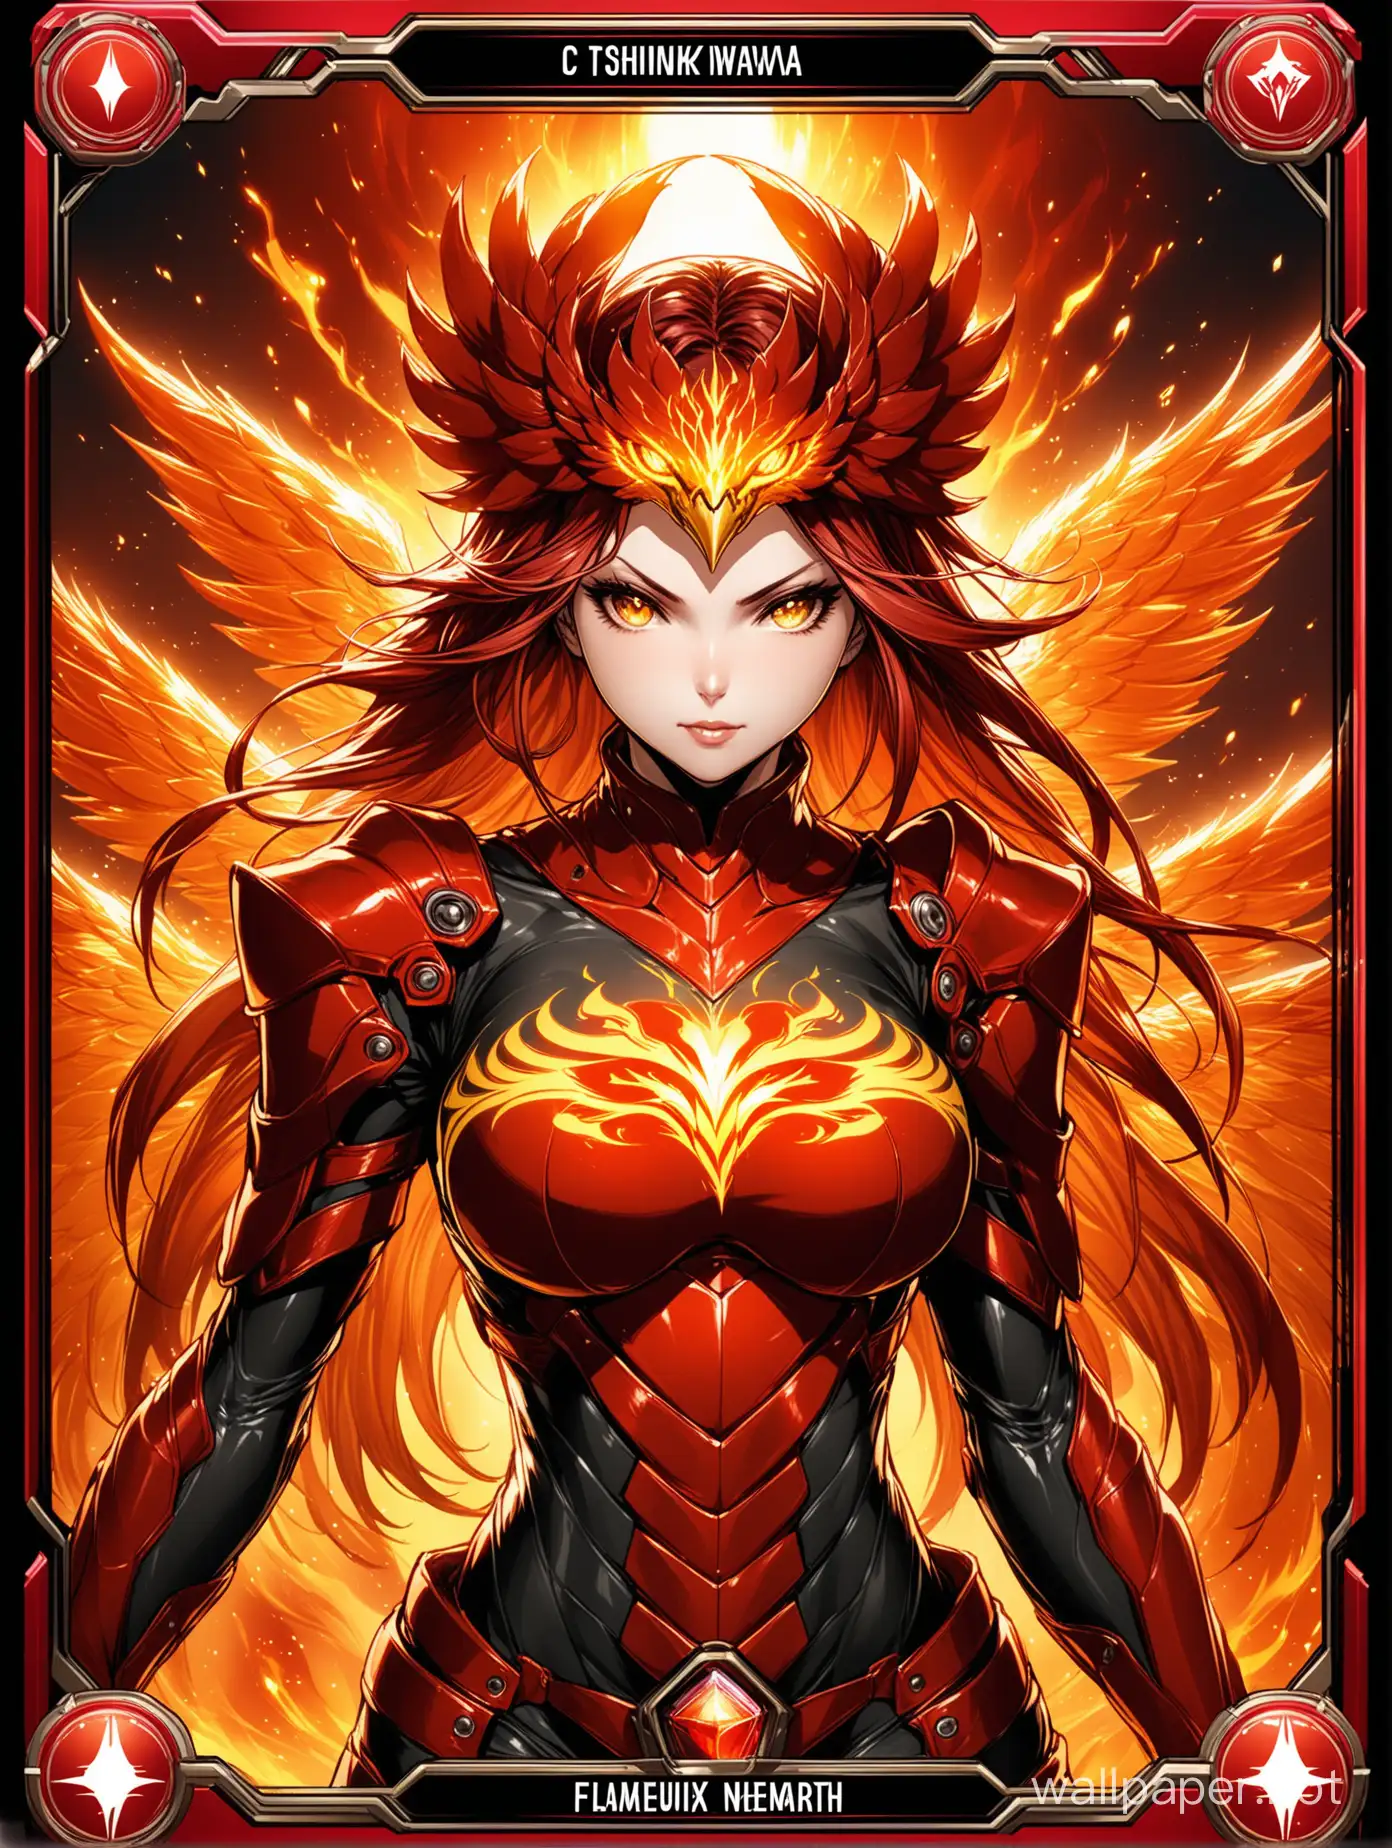 complex border add bold text""Phoenix Flameheart"" complex New Blood Collectable  card include name "Phoenix Flameheart" anime card include stats "Description: Phoenix Flameheart" "Strength: 8/10""Speed: 8/10""Agility: 7/10""Intelligence: 7/10""Fear Factor: 8/10" premium 14PT card stock authenticated breathtaking UHD New Blood Hero visuals, trending on 'new blood gaming' marketed by 'new blood network'--chaos 90 --testpfx Description: realistic, photorealistic porn in all her beauty breathtaking"Incorporate the influence of renowned game character artists, art by Alex Ahad, Mariel Cartwright and animation by Yuji Shinkawa, Toshiaki Mori, to infuse your creations with dynamic energy and captivating design. Draw inspiration from their iconic styles and techniques to elevate your characters to new heights of visual appeal and authenticity."by Hajime Sorayama, glossy intricate design, digital art, illustration, concept art, smooth, sharp focus, studio lighting, (elegant), Canon EOS C300, Fujifilm XT3, add_details_XL-fp16 algorithm with Octane 4D rendering, aw0k euphoric style rfktrstyle --niji 50 --testpfx more detail XL, glowing, red theme, neon trim